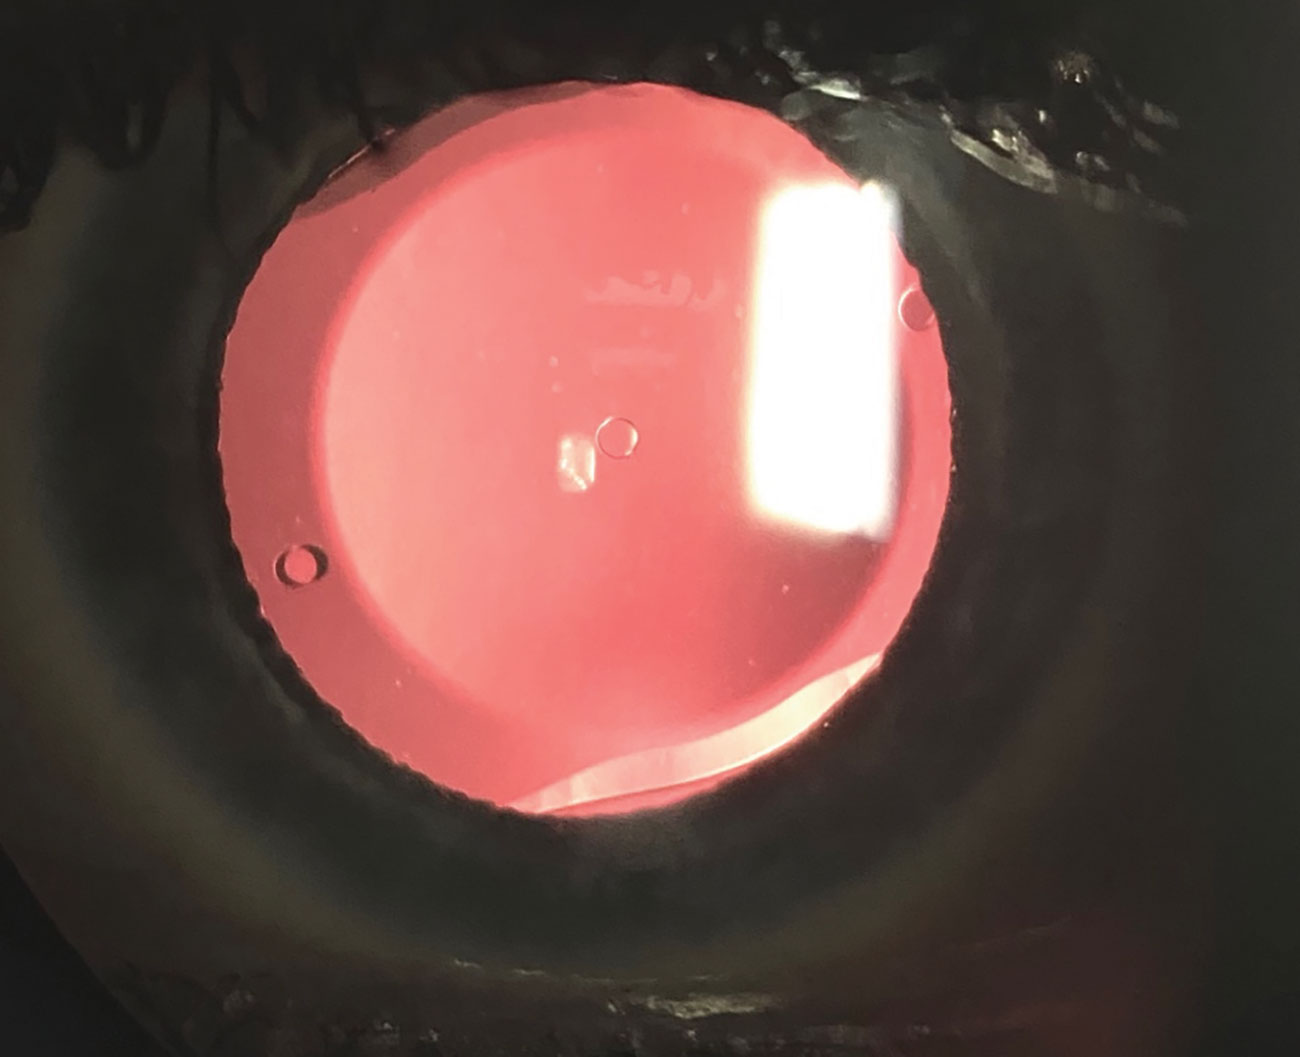 Fig. 3. A slit lamp photo shows the Evo ICL, which has a central port and will allow patients to have the ICL procedure without the need for an iridotomy. This will hopefully be approved soon by the FDA.